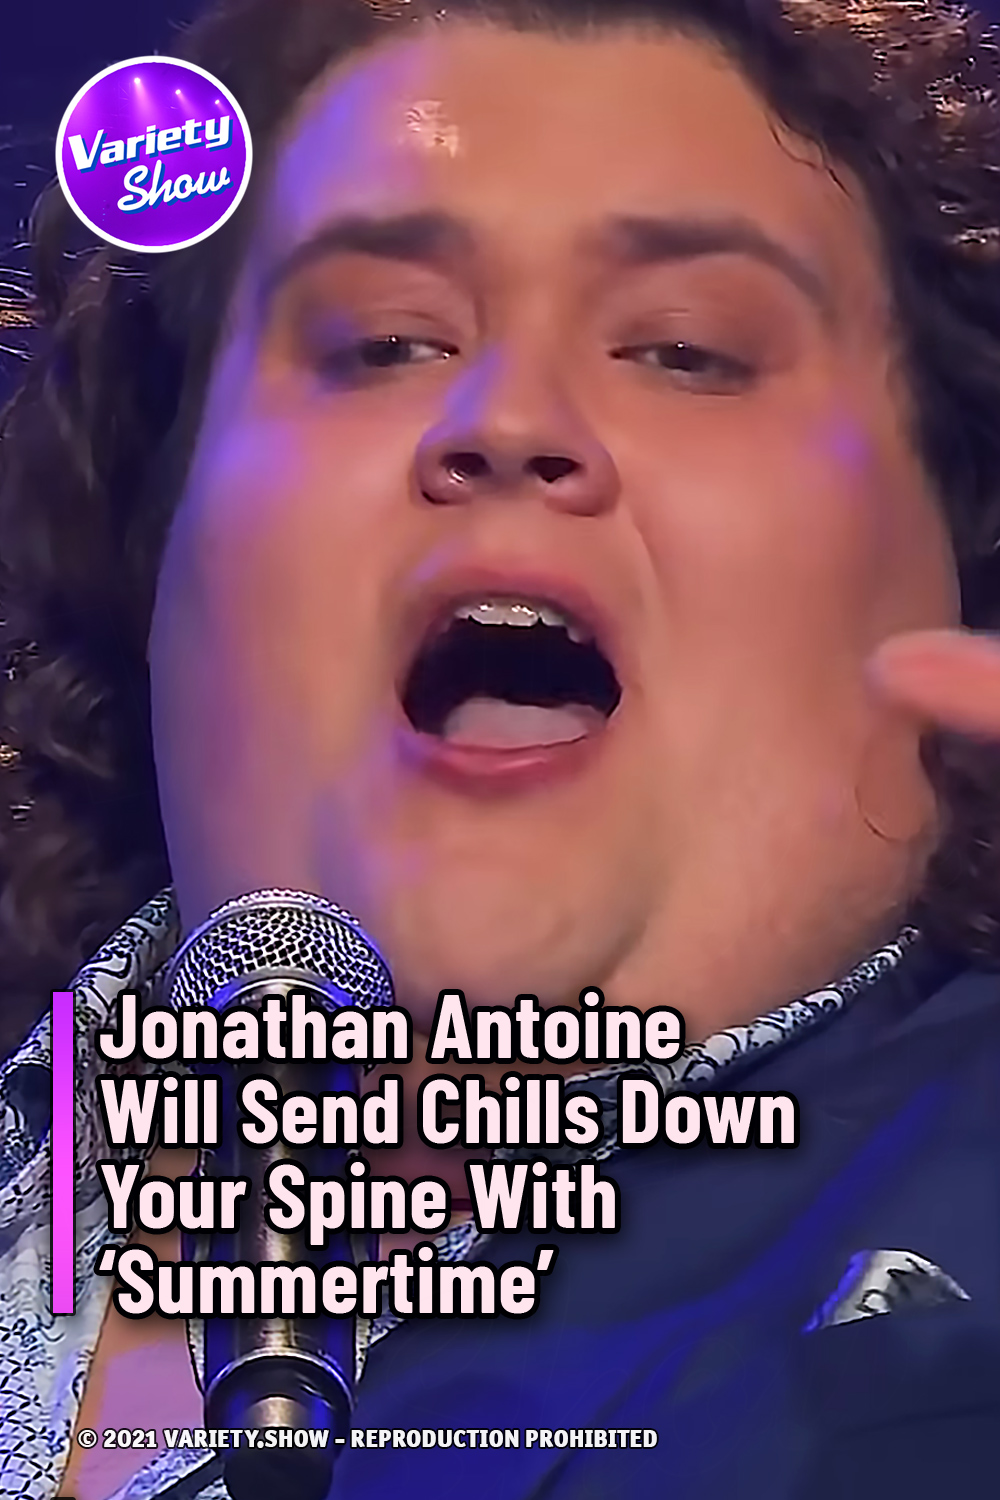 Jonathan Antoine Will Send Chills Down Your Spine With \'Summertime\'